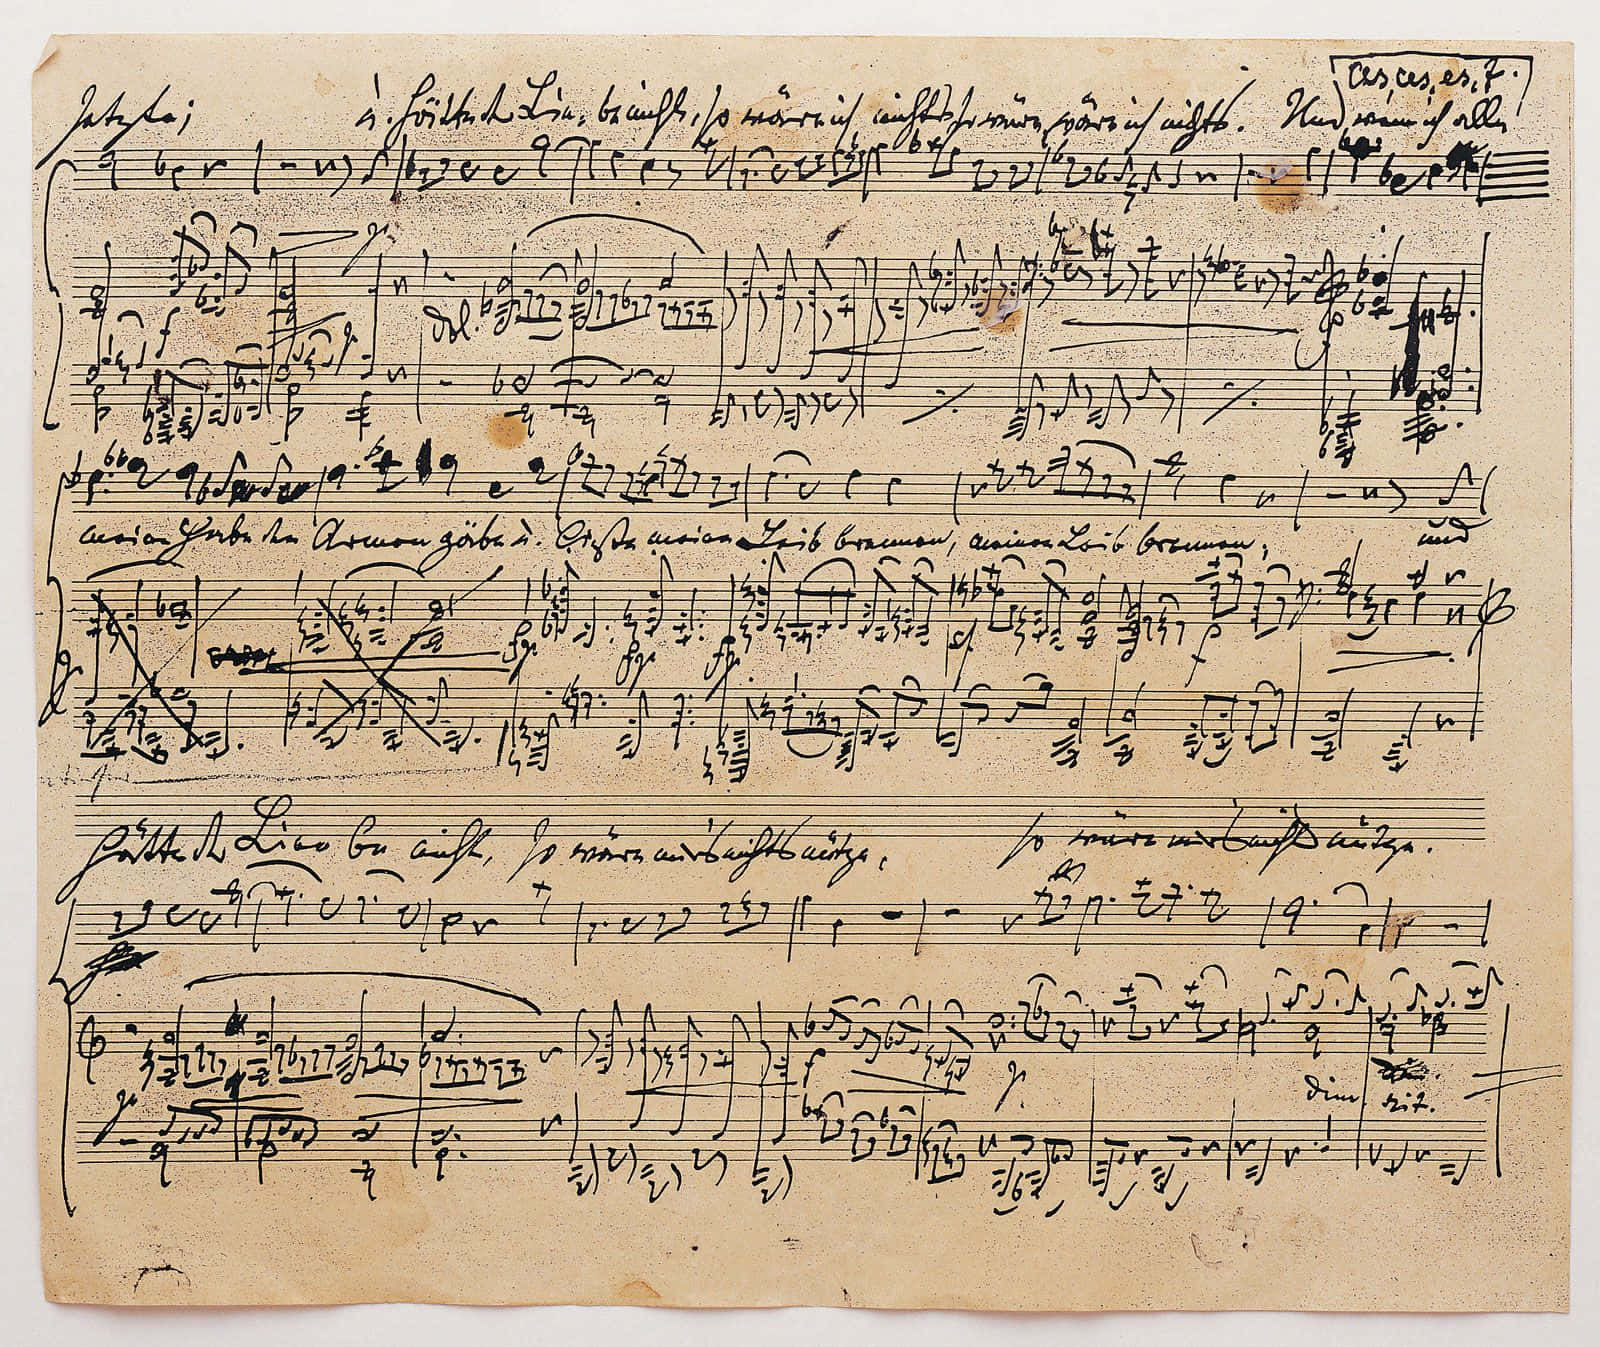 Picture Of Written Music Notation